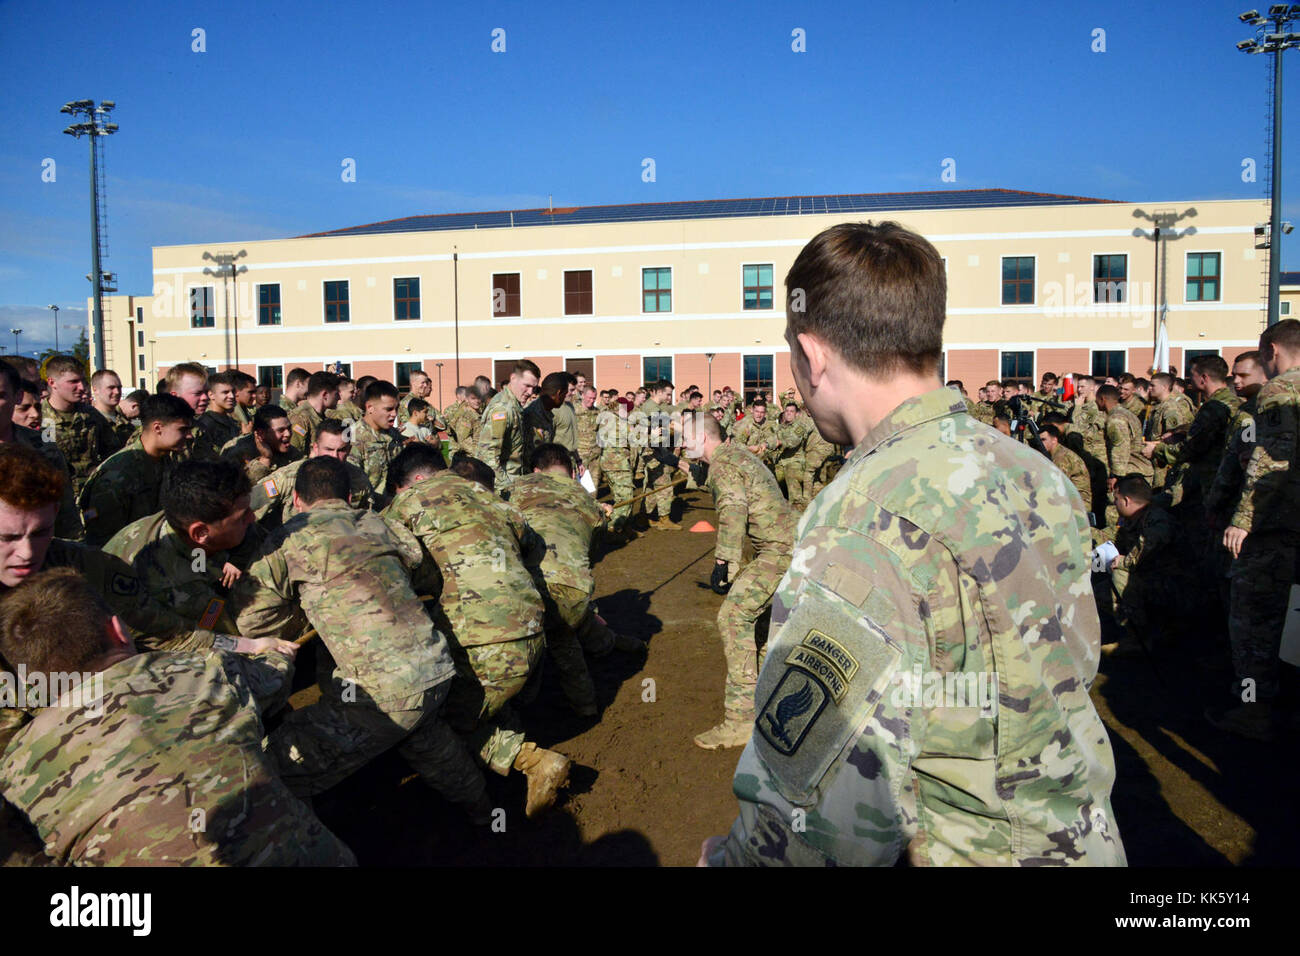 U.S. Army Paratroopers assigned to 2nd Battalion, 503rd Infantry Regiment, 173rd Airborne Brigade, compete compete in the tug-of-war during a Rockvember Event for Brostrom Challenge, at Caserma Del Din, Vicenza, Italy, Nov. 8, 2017.   The 173rd Airborne Brigade is the U.S. Army Contingency Response Force in Europe, capable of projecting ready forces anywhere in the U.S. European, Africa or Central Commands areas of responsibility within 18 hours.   (U.S. Army photo by Massimo Bovo) Stock Photo